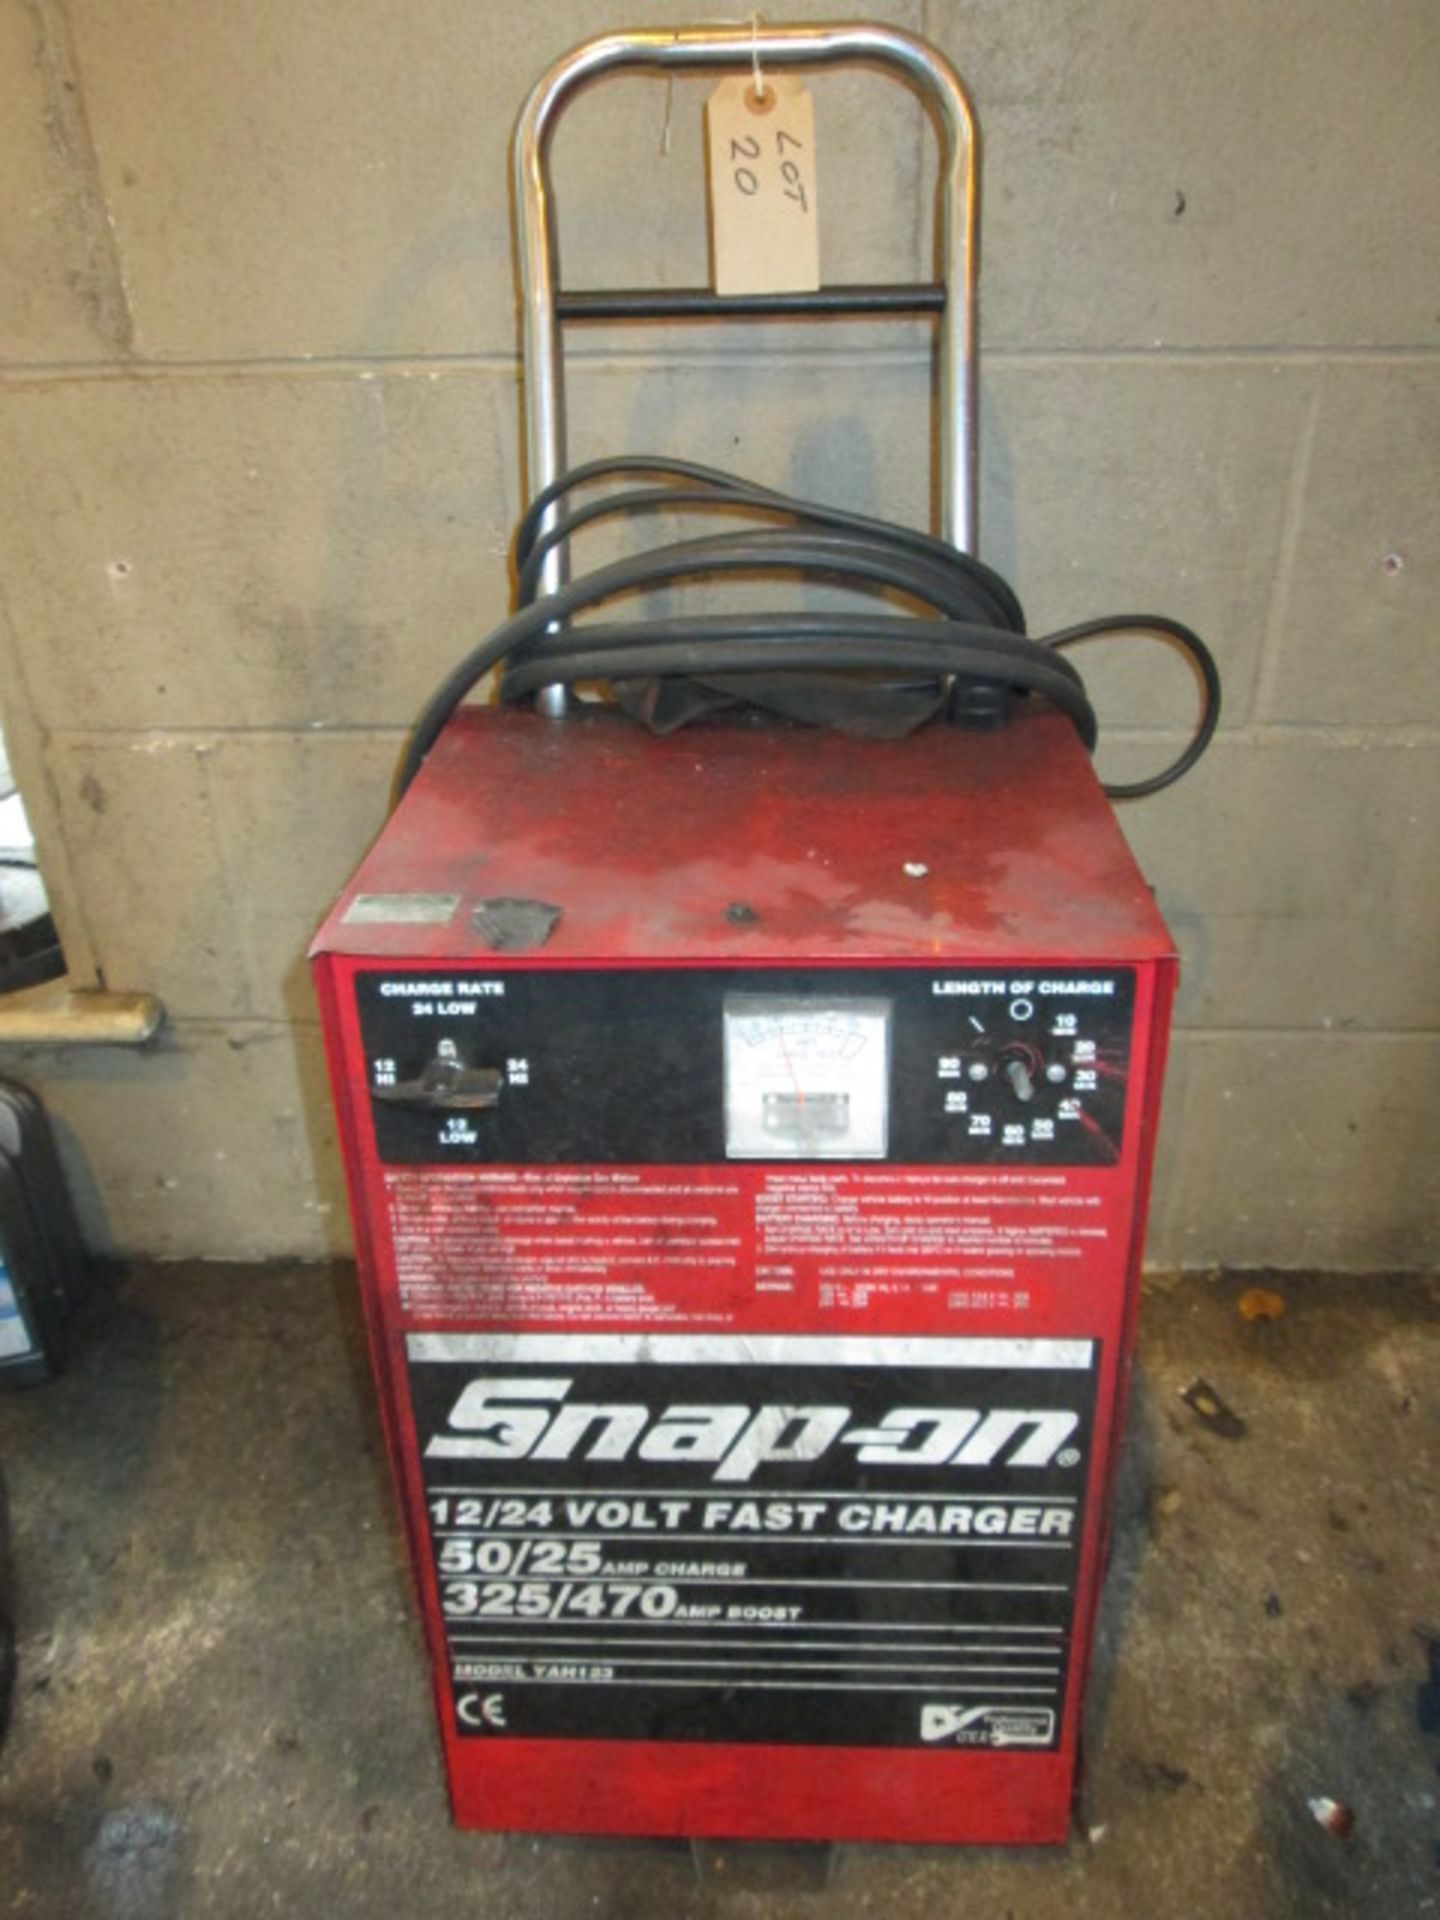 Mobile Snap On 12/24 Volt Fast Charger, Model - YAH 123. 50/25 Amp Charge, 325/470 Amp Boost. (A/F)